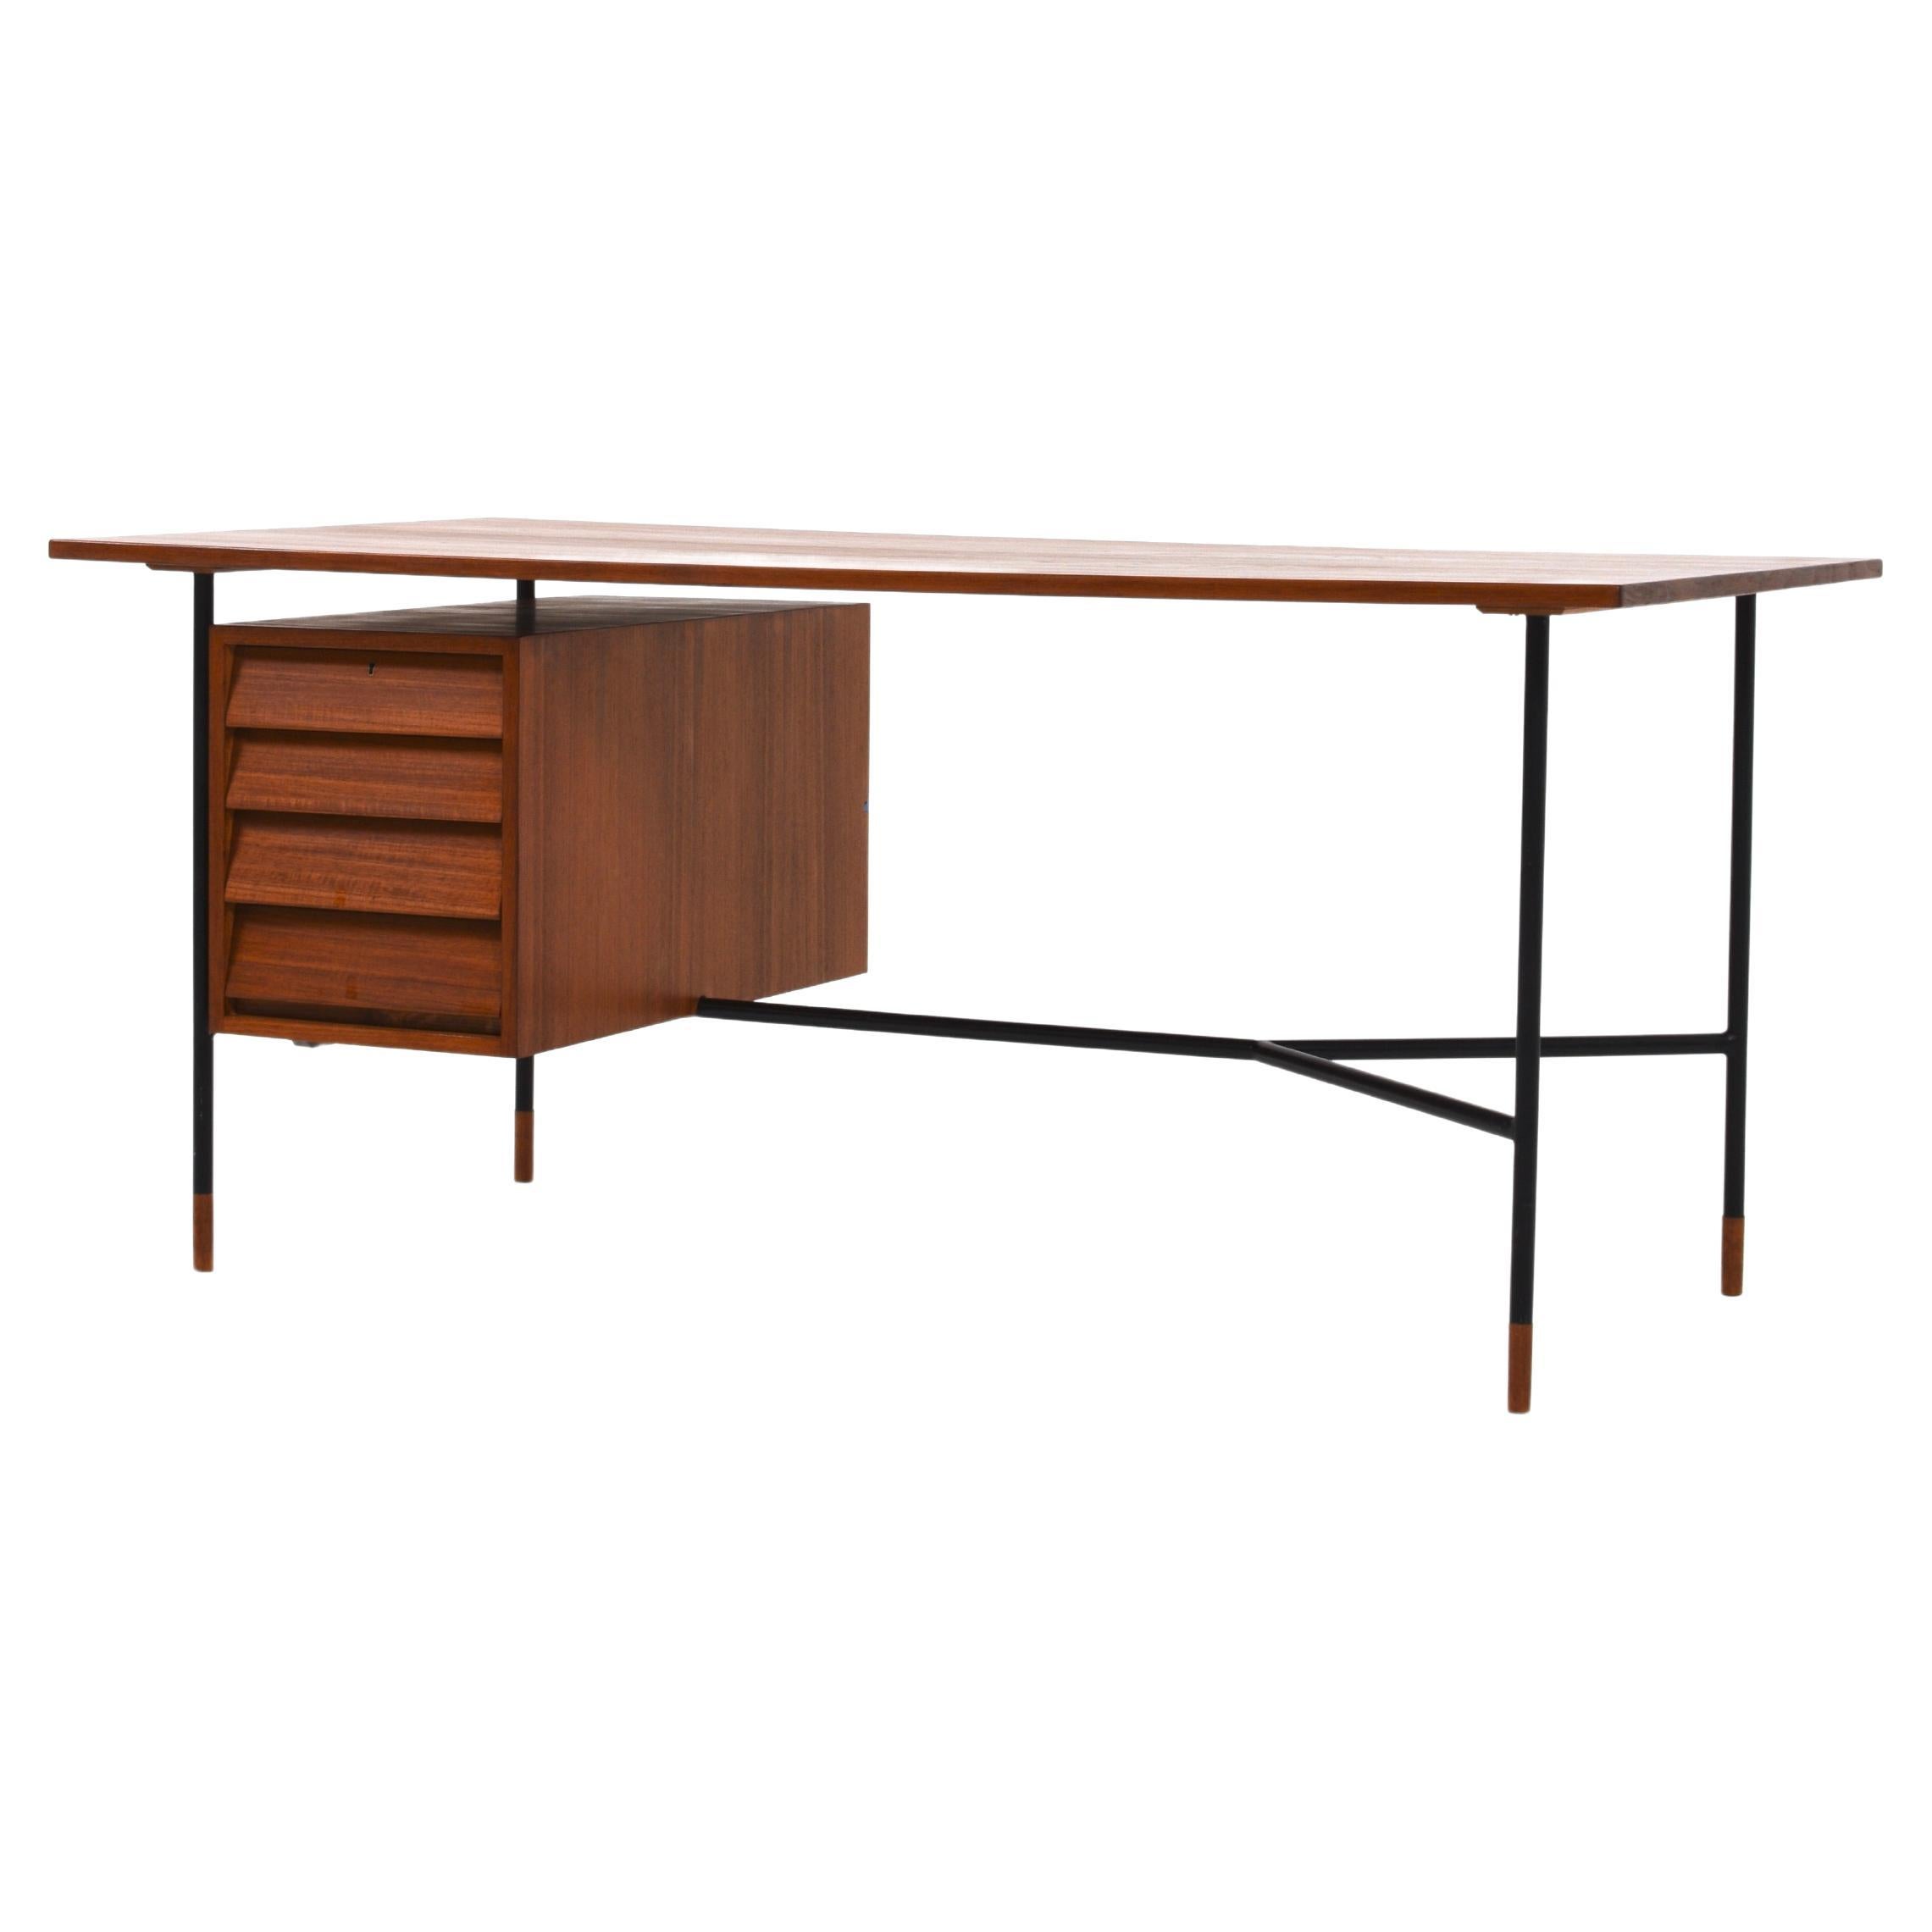 Rare Desk H-55 by Åke Hassbjer in teak and steel base, 1950s